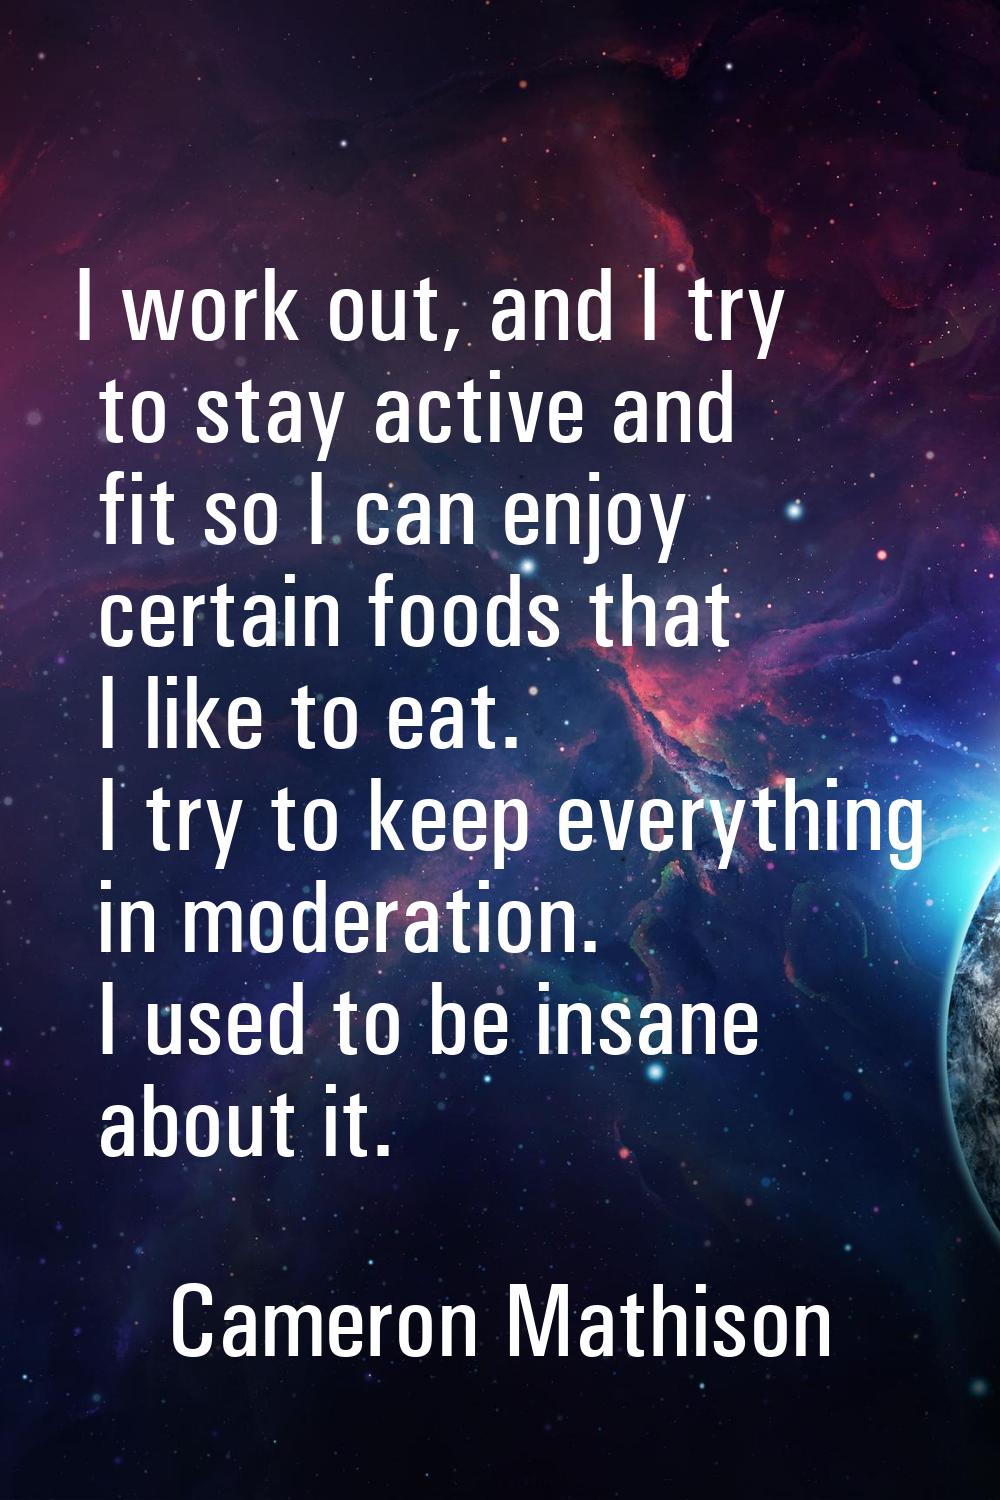 I work out, and I try to stay active and fit so I can enjoy certain foods that I like to eat. I try